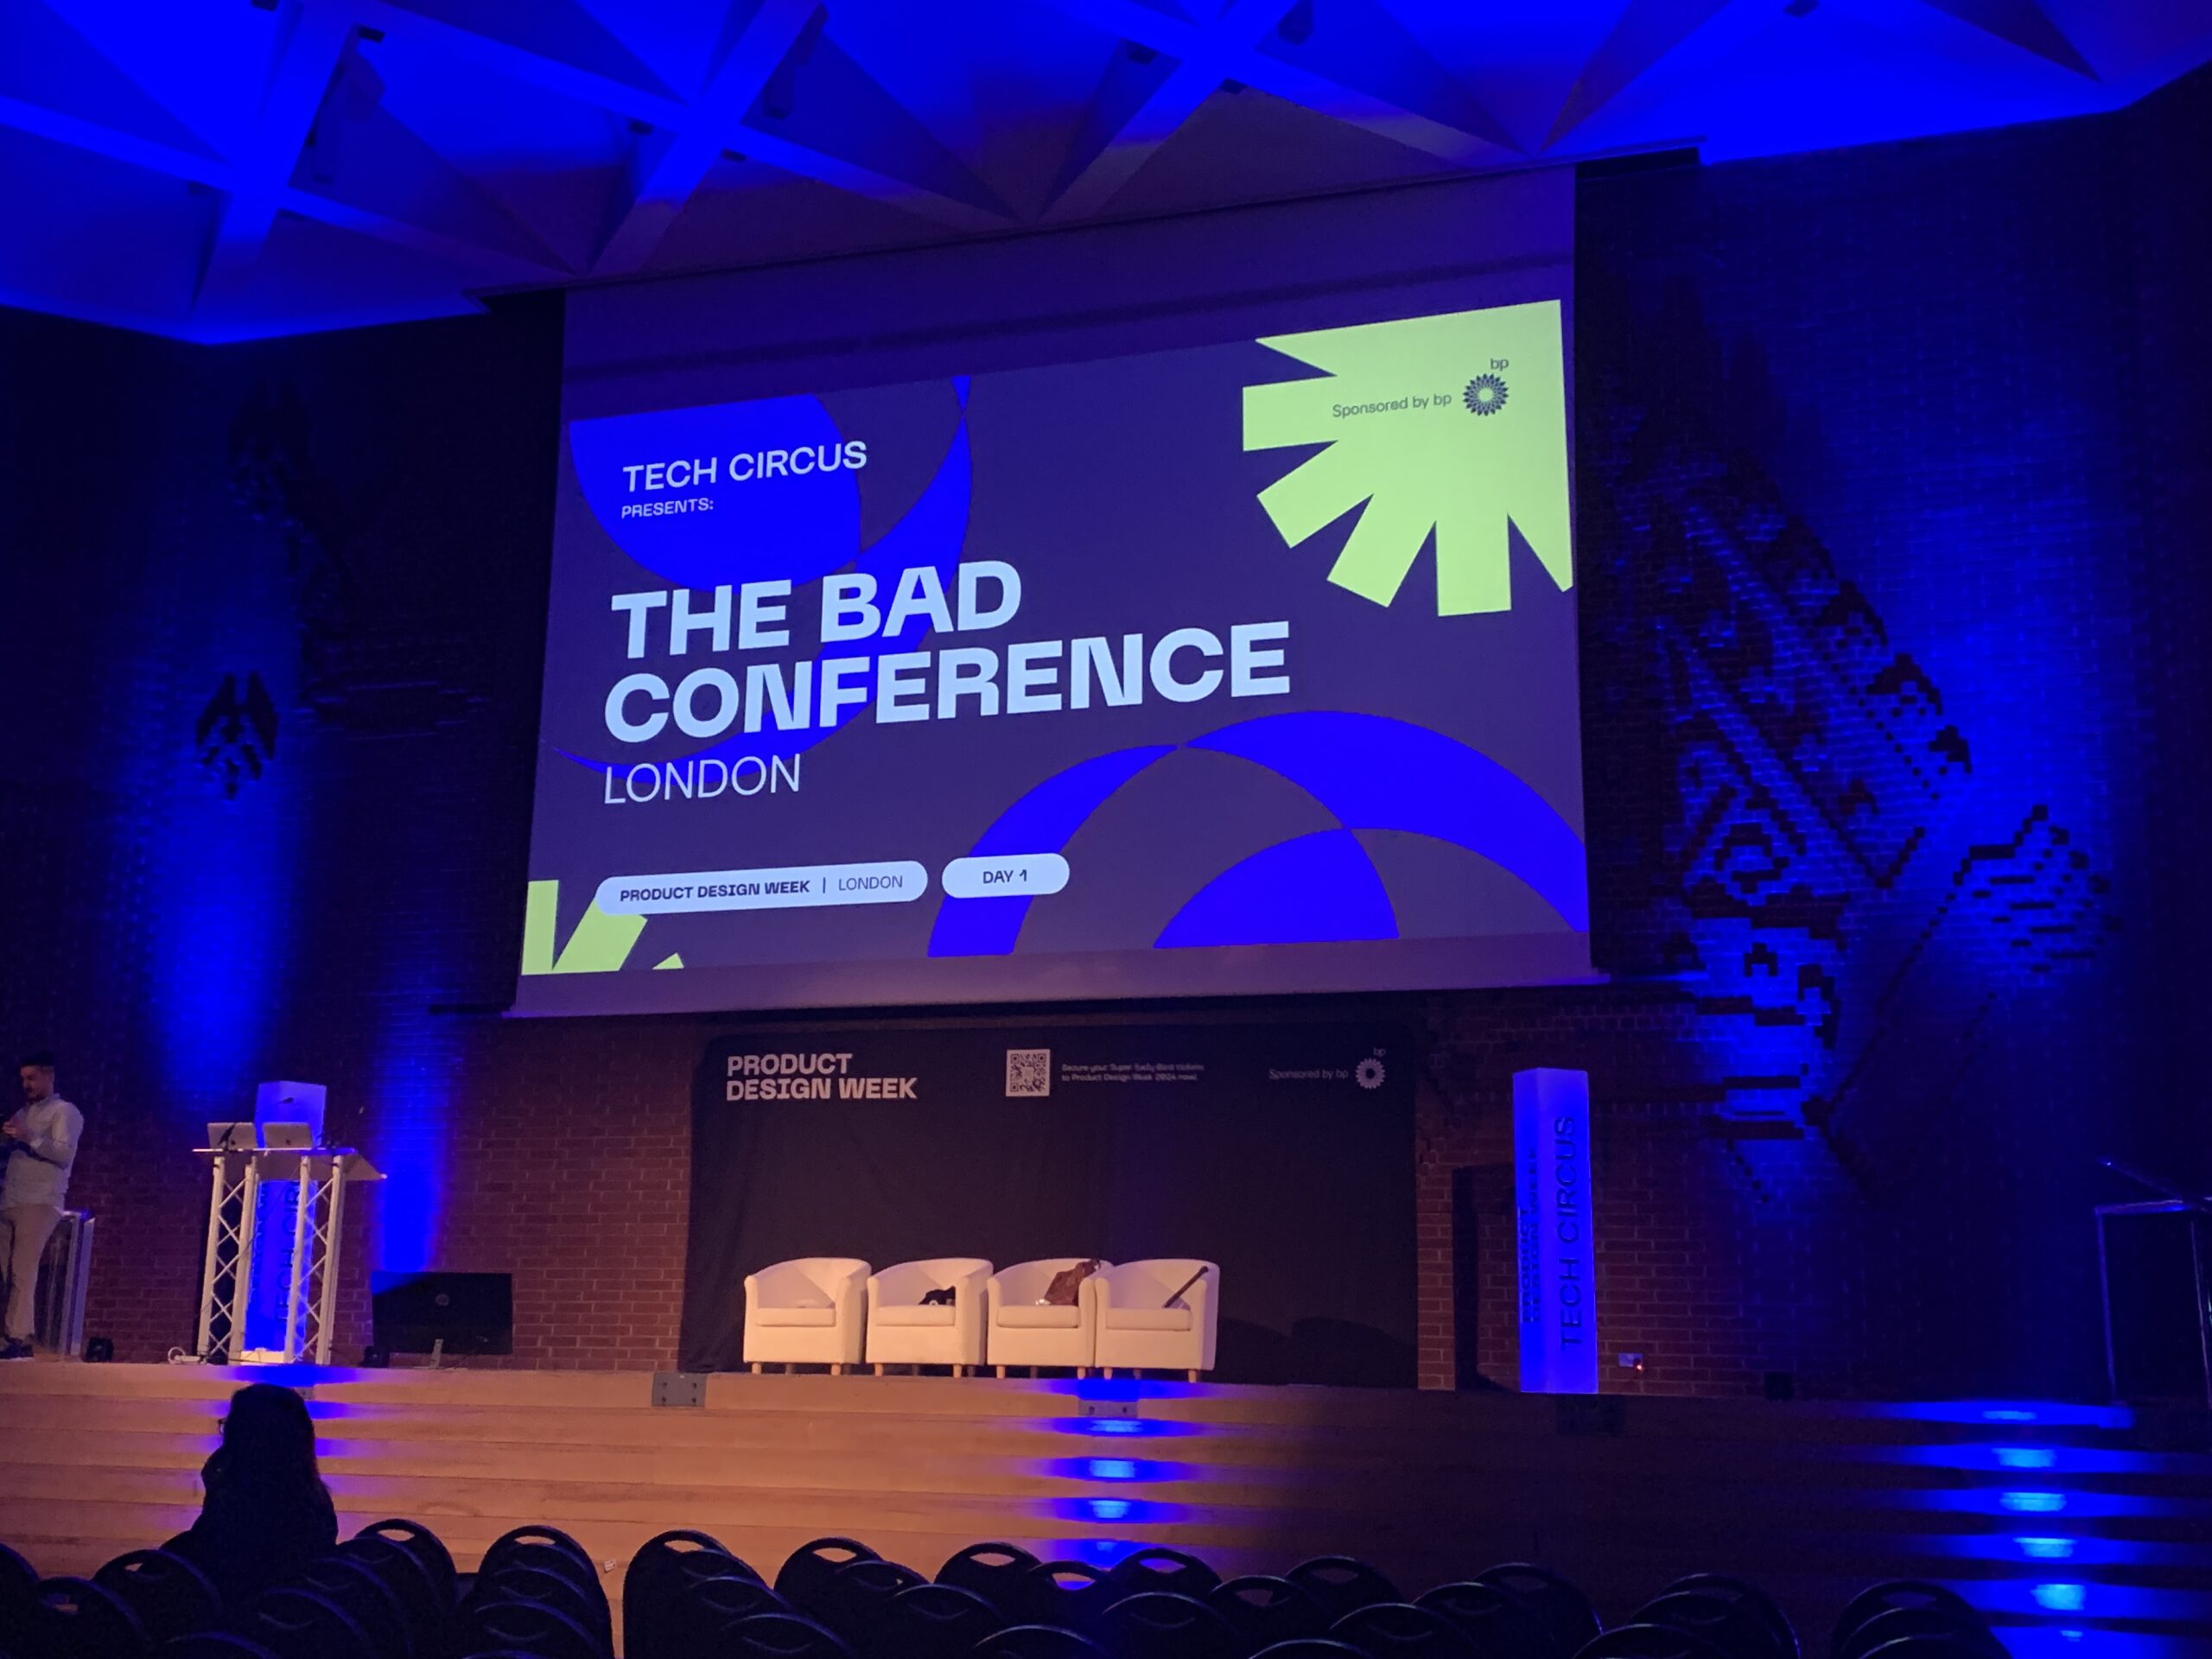 The BAD Conference